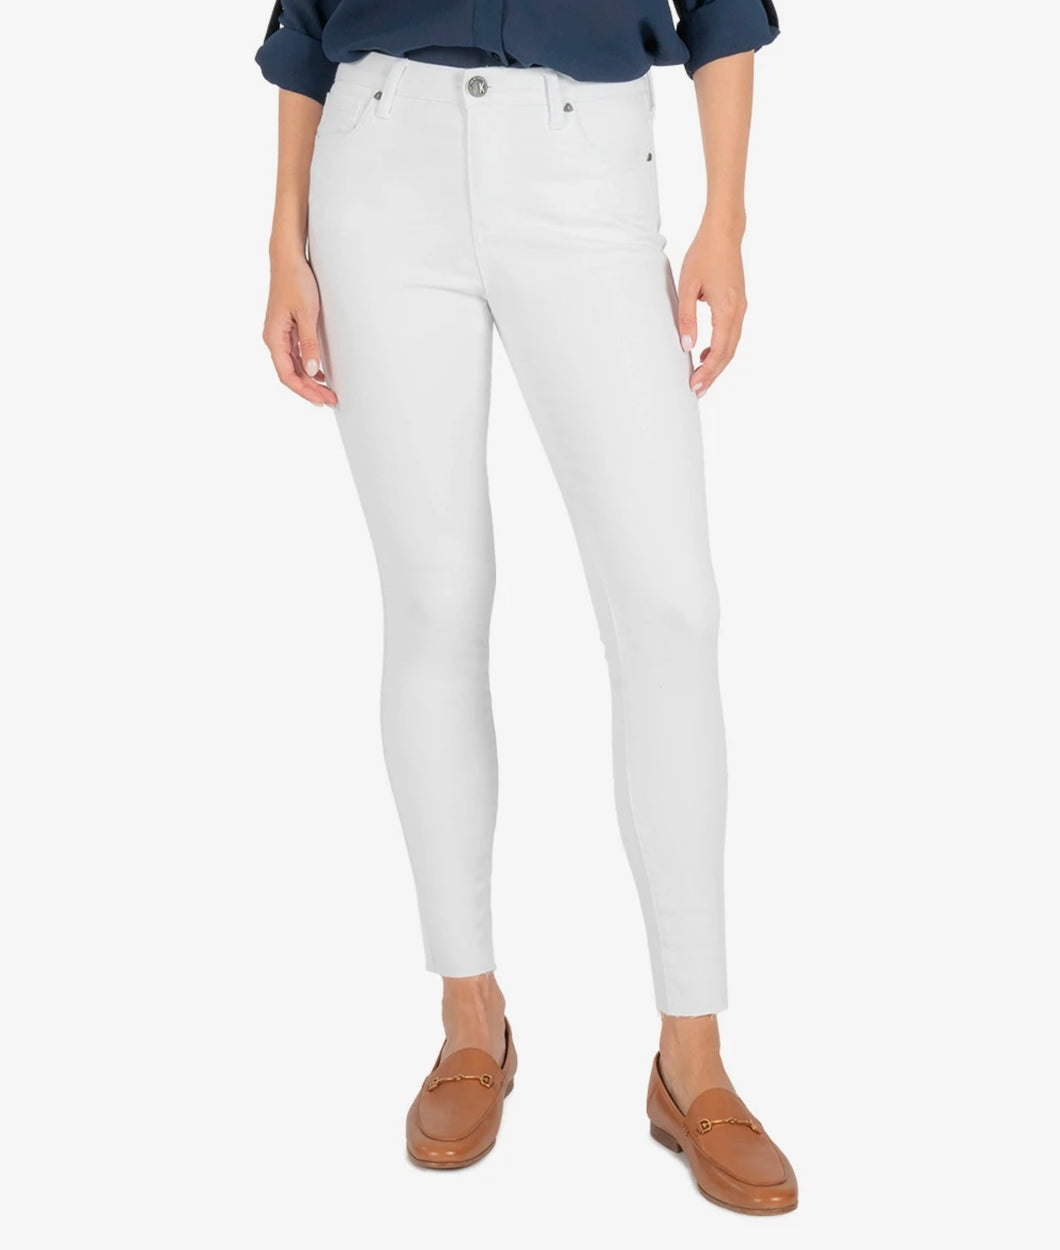 Kut: Connie High Rise Ankle Skinny - Optic White